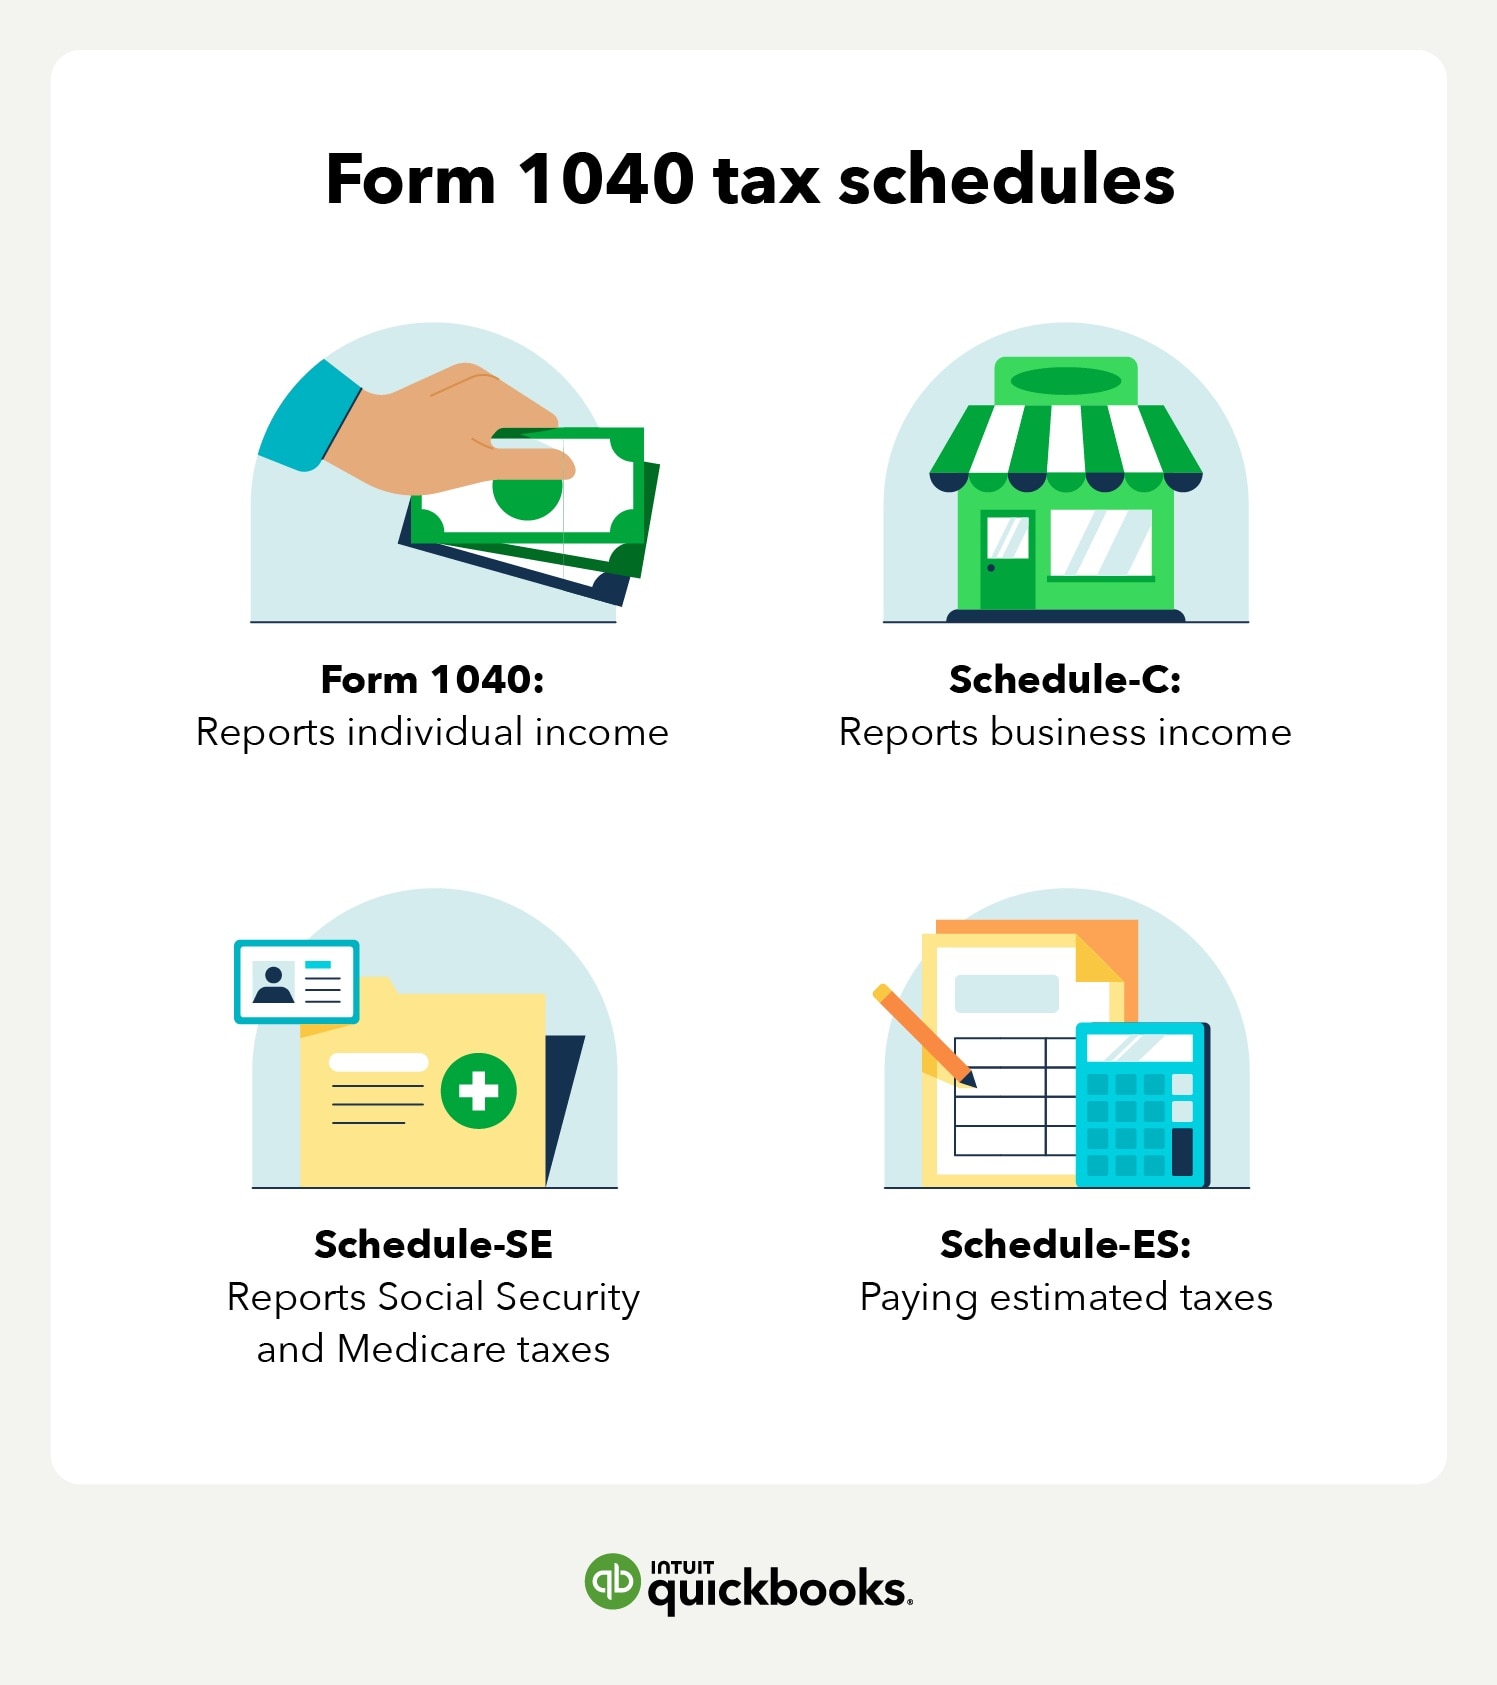 1040 tax schedules. Form 1040: reports individual income. Schedule-C: reports business income. Schedule-SE: reports social security and medicare taxes. Schedule-ES: paying estimated taxes.